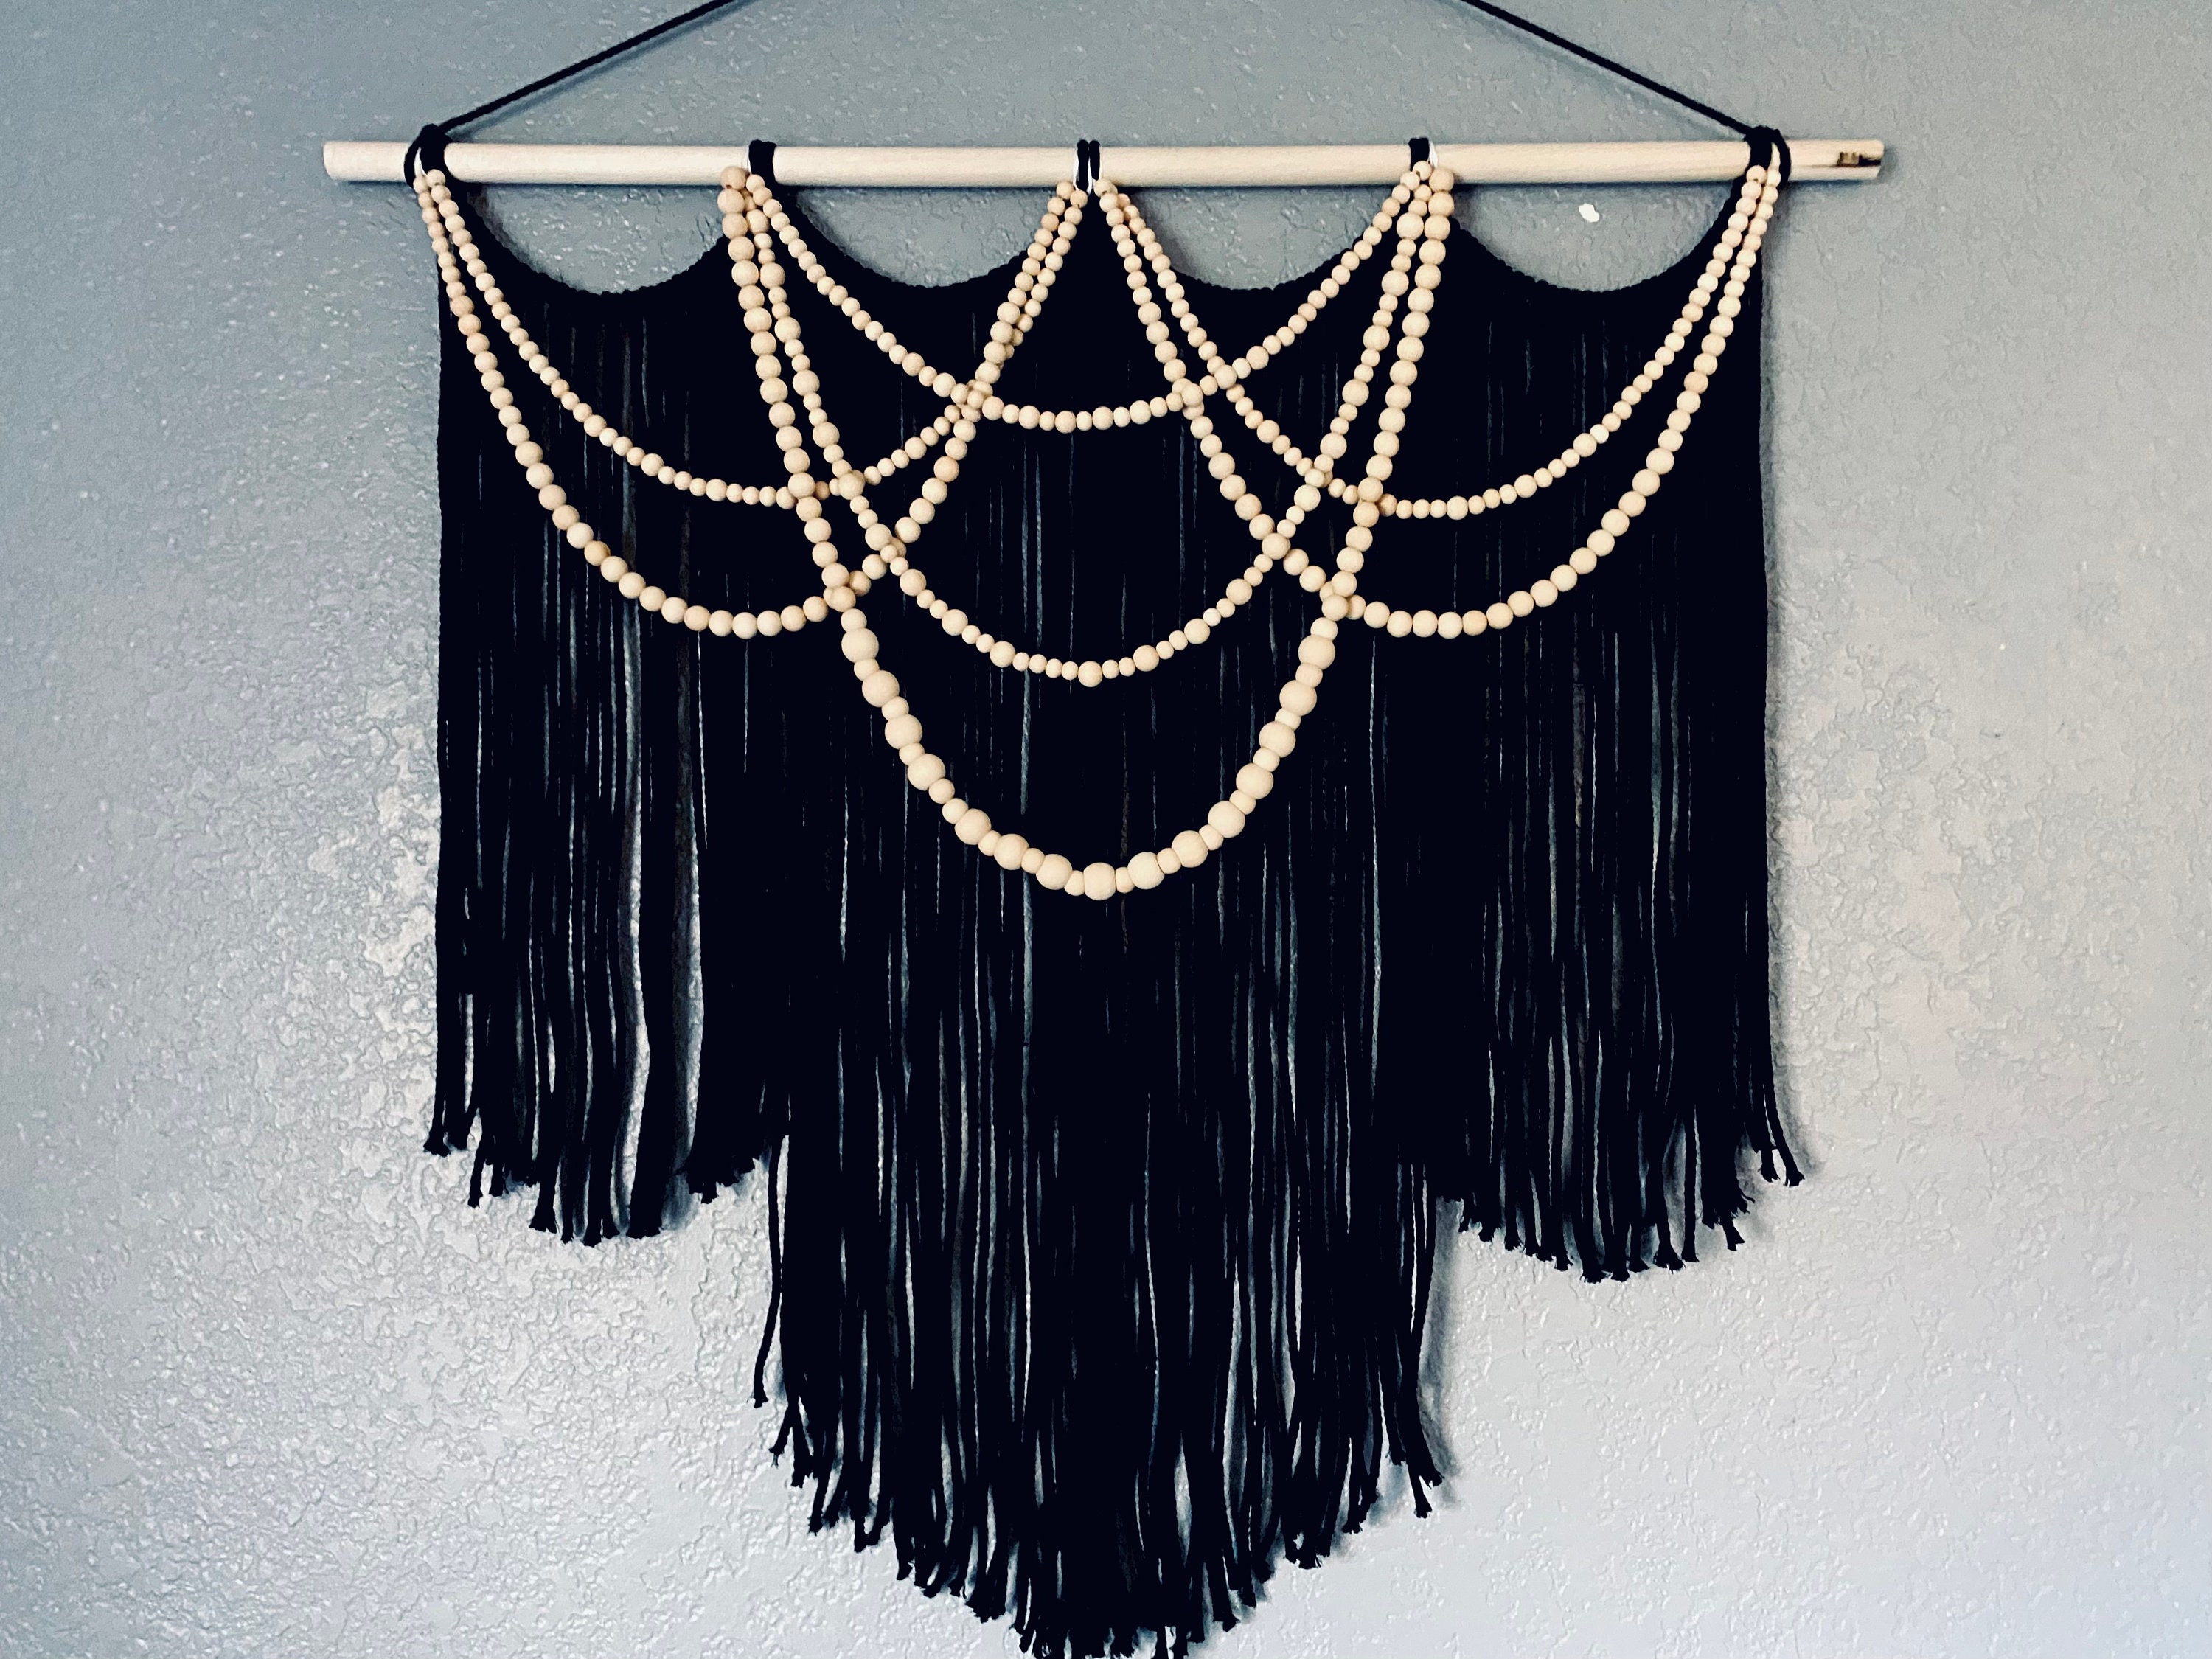 Large Black Macrame Wall Hanging, Wood Bead Accents, Necklace Accent,  Handmade Gift Ideas, Macrame Back Drop, Boho Home Decor 